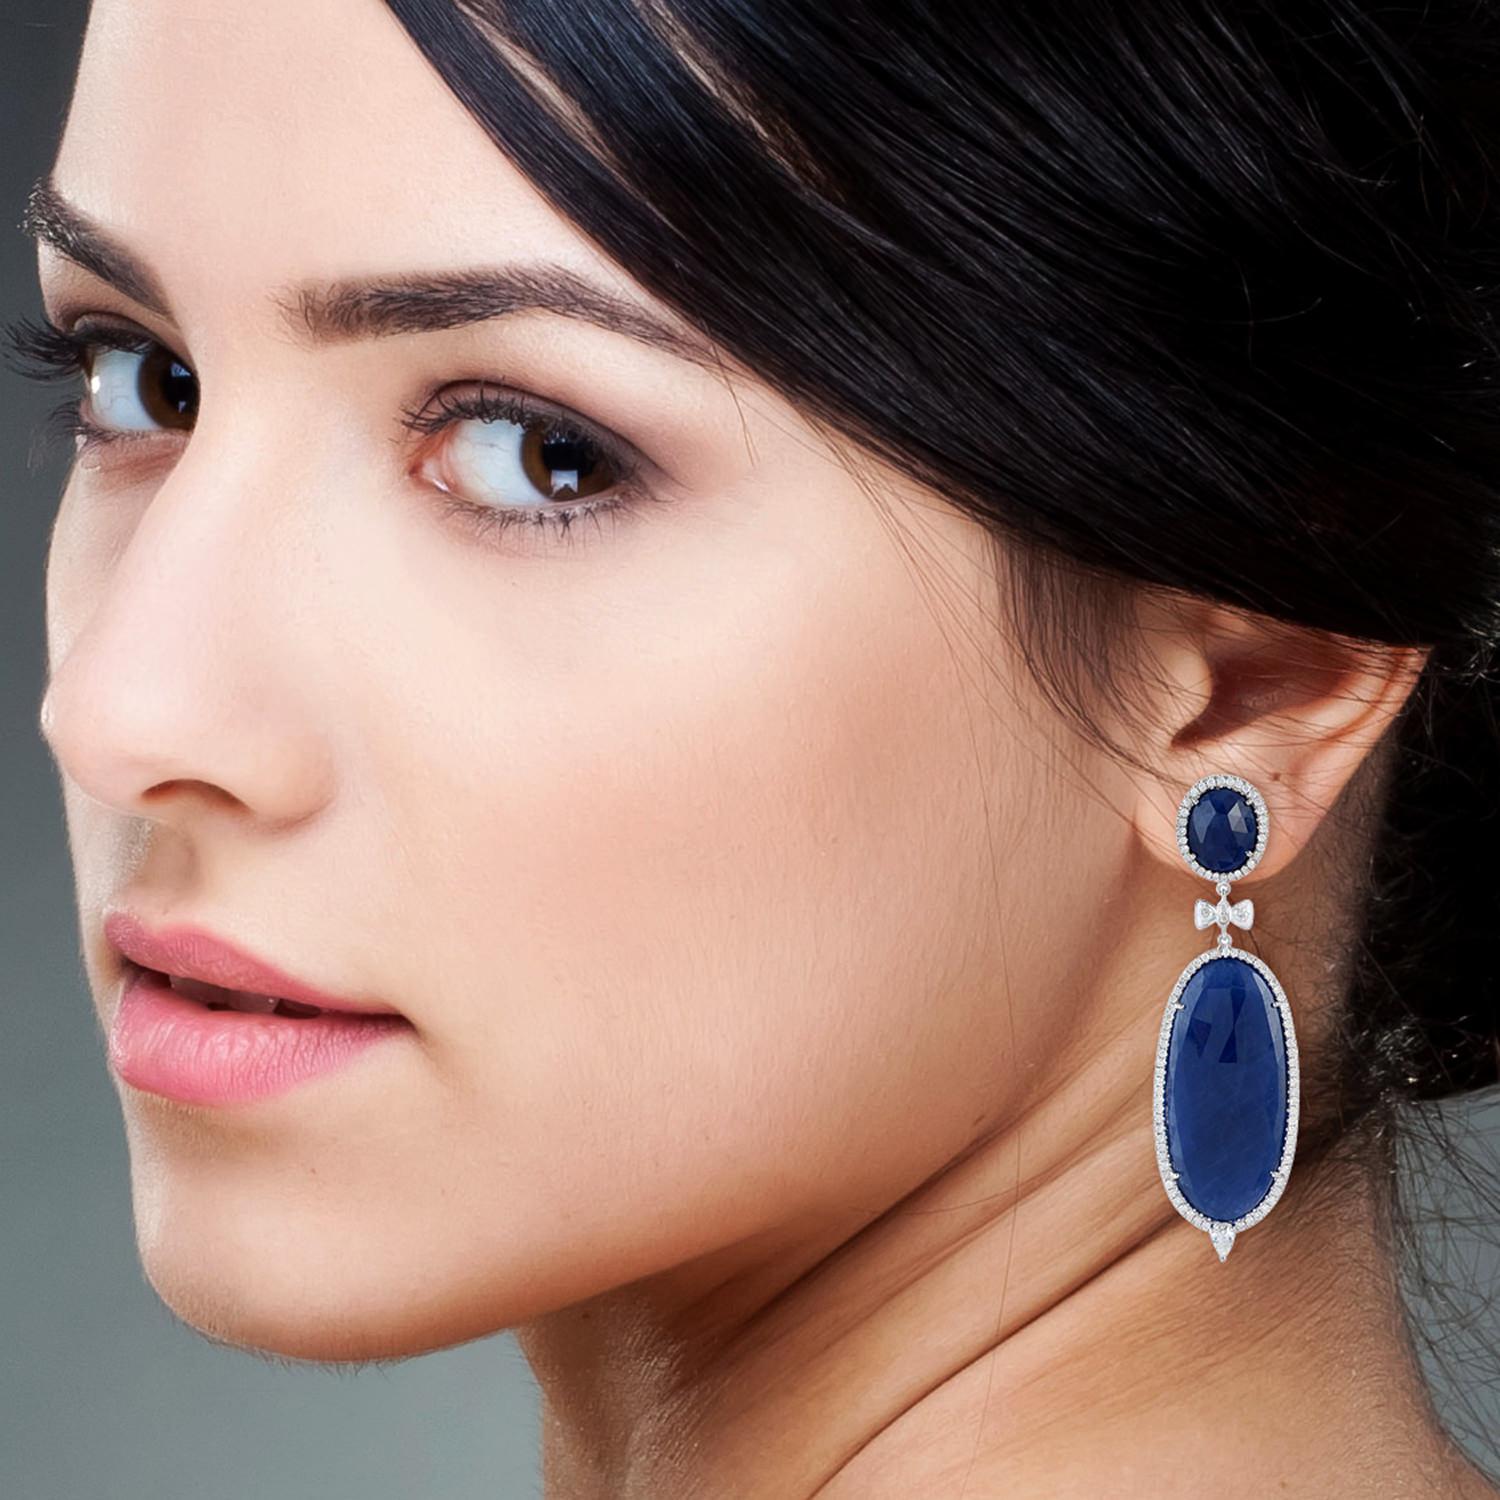 Cast in 18-karat gold, these stunning drop earrings are set with 59.34 carats blue sapphire and 2.04 carats of sparkling diamonds. 

FOLLOW  MEGHNA JEWELS storefront to view the latest collection & exclusive pieces.  Meghna Jewels is proudly rated